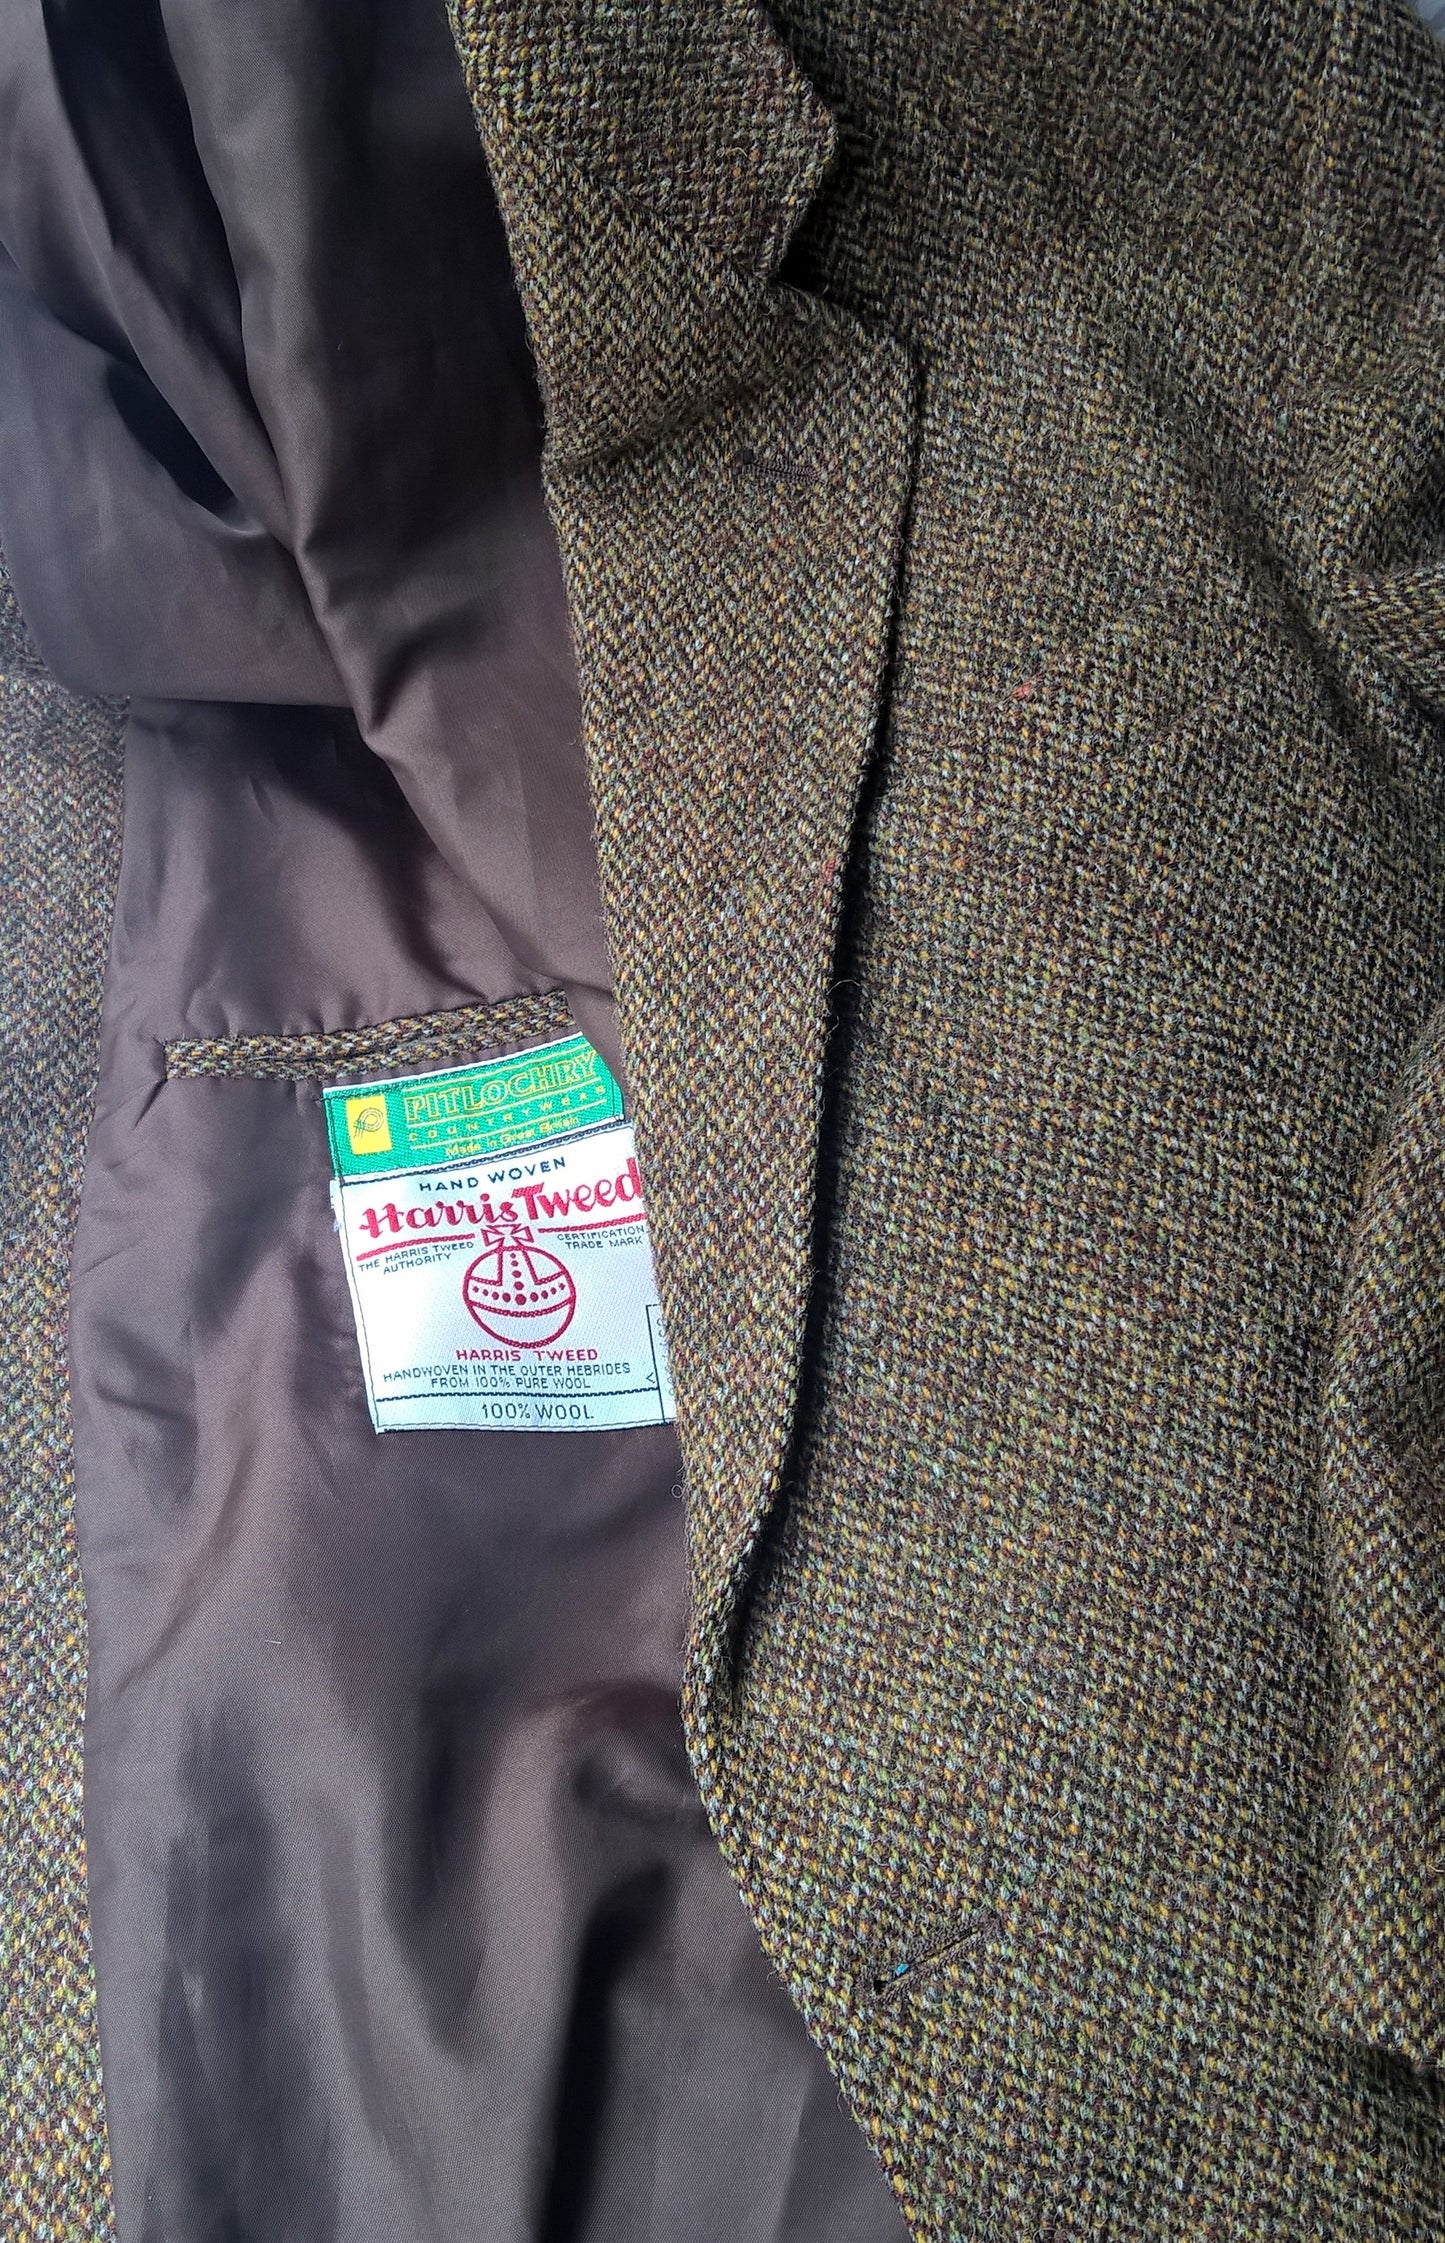 One of the vintage Harris Tweed jackets upcycled to make the smoking cap